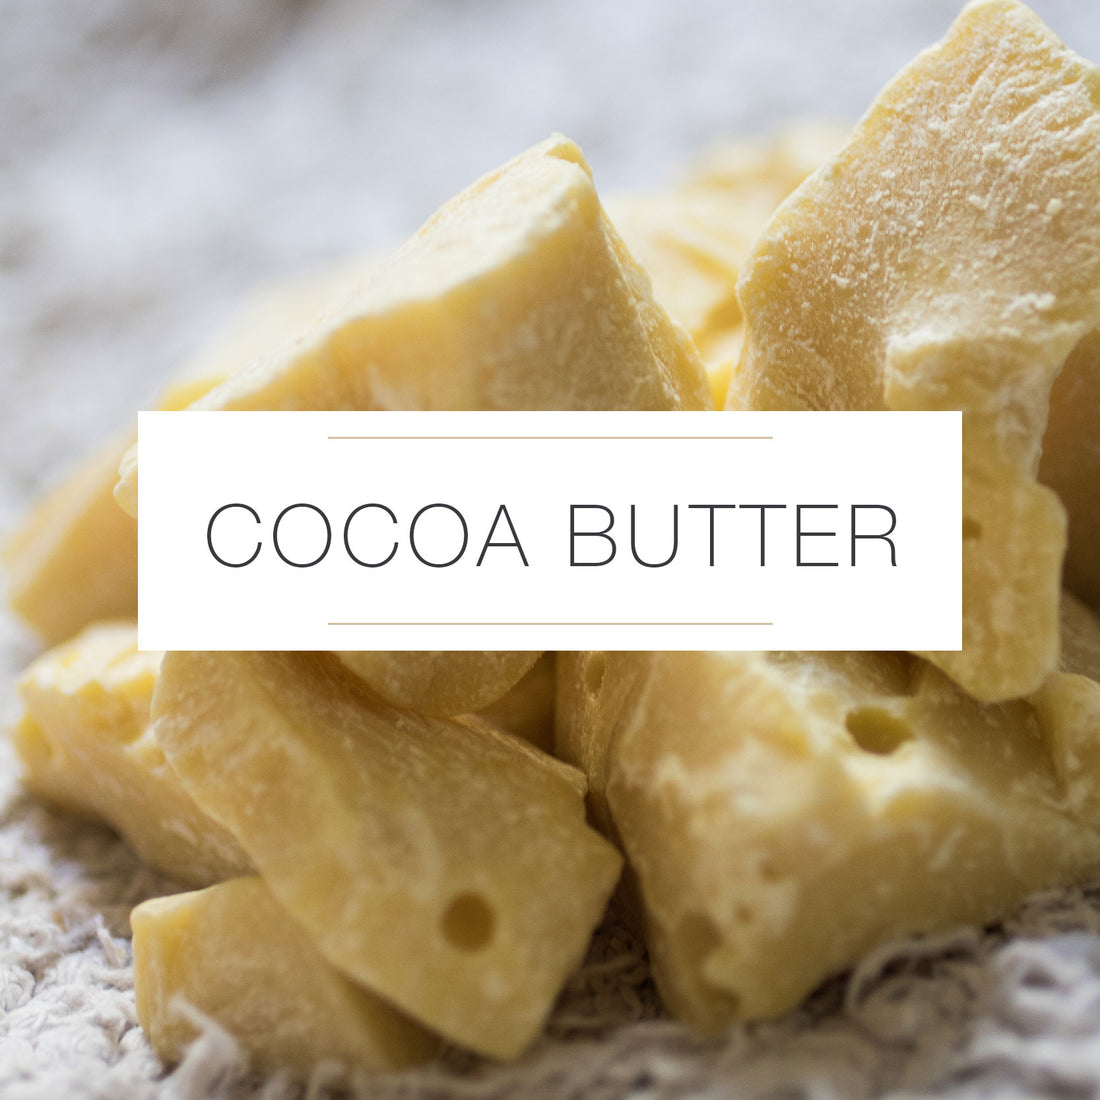 COCOA BUTTER